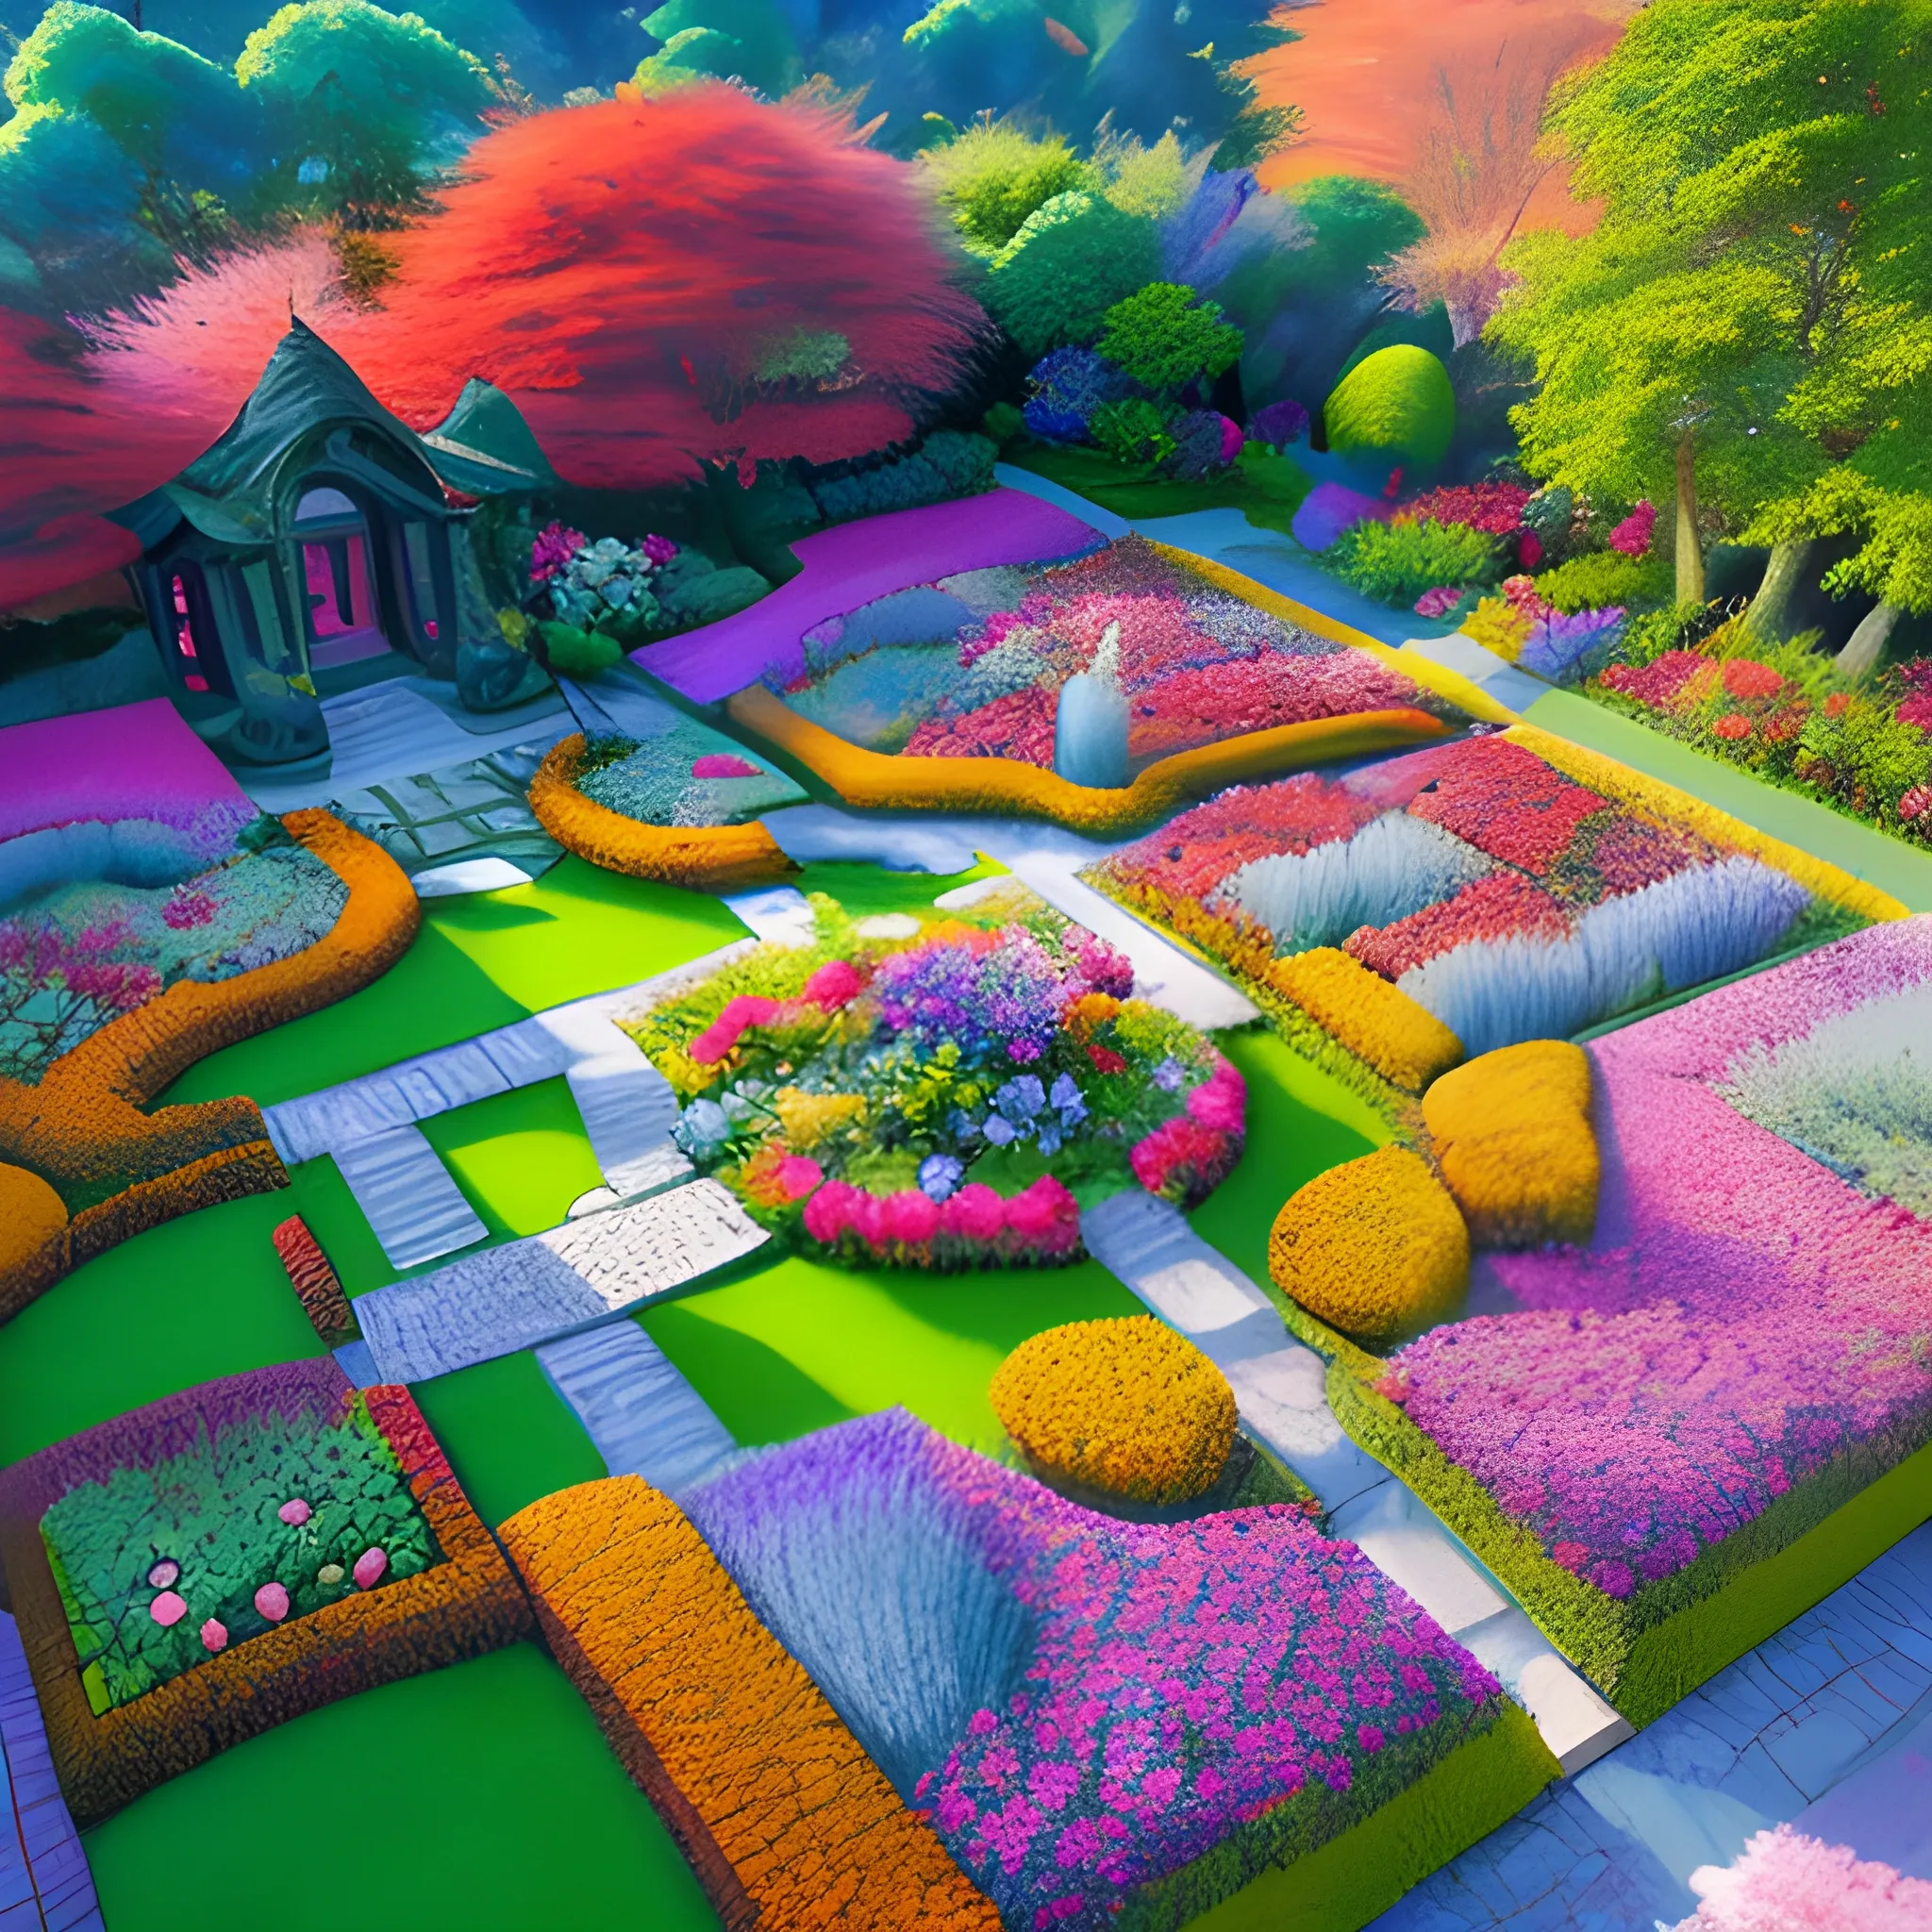 Artistic, scenic landscape in vibrant colors with picturesque flowers. Overhead shot highlighting intricate details. Warm, sunlight illuminating the serene garden. Masterpiece of nature's beauty, couple man and woman, love, 3D